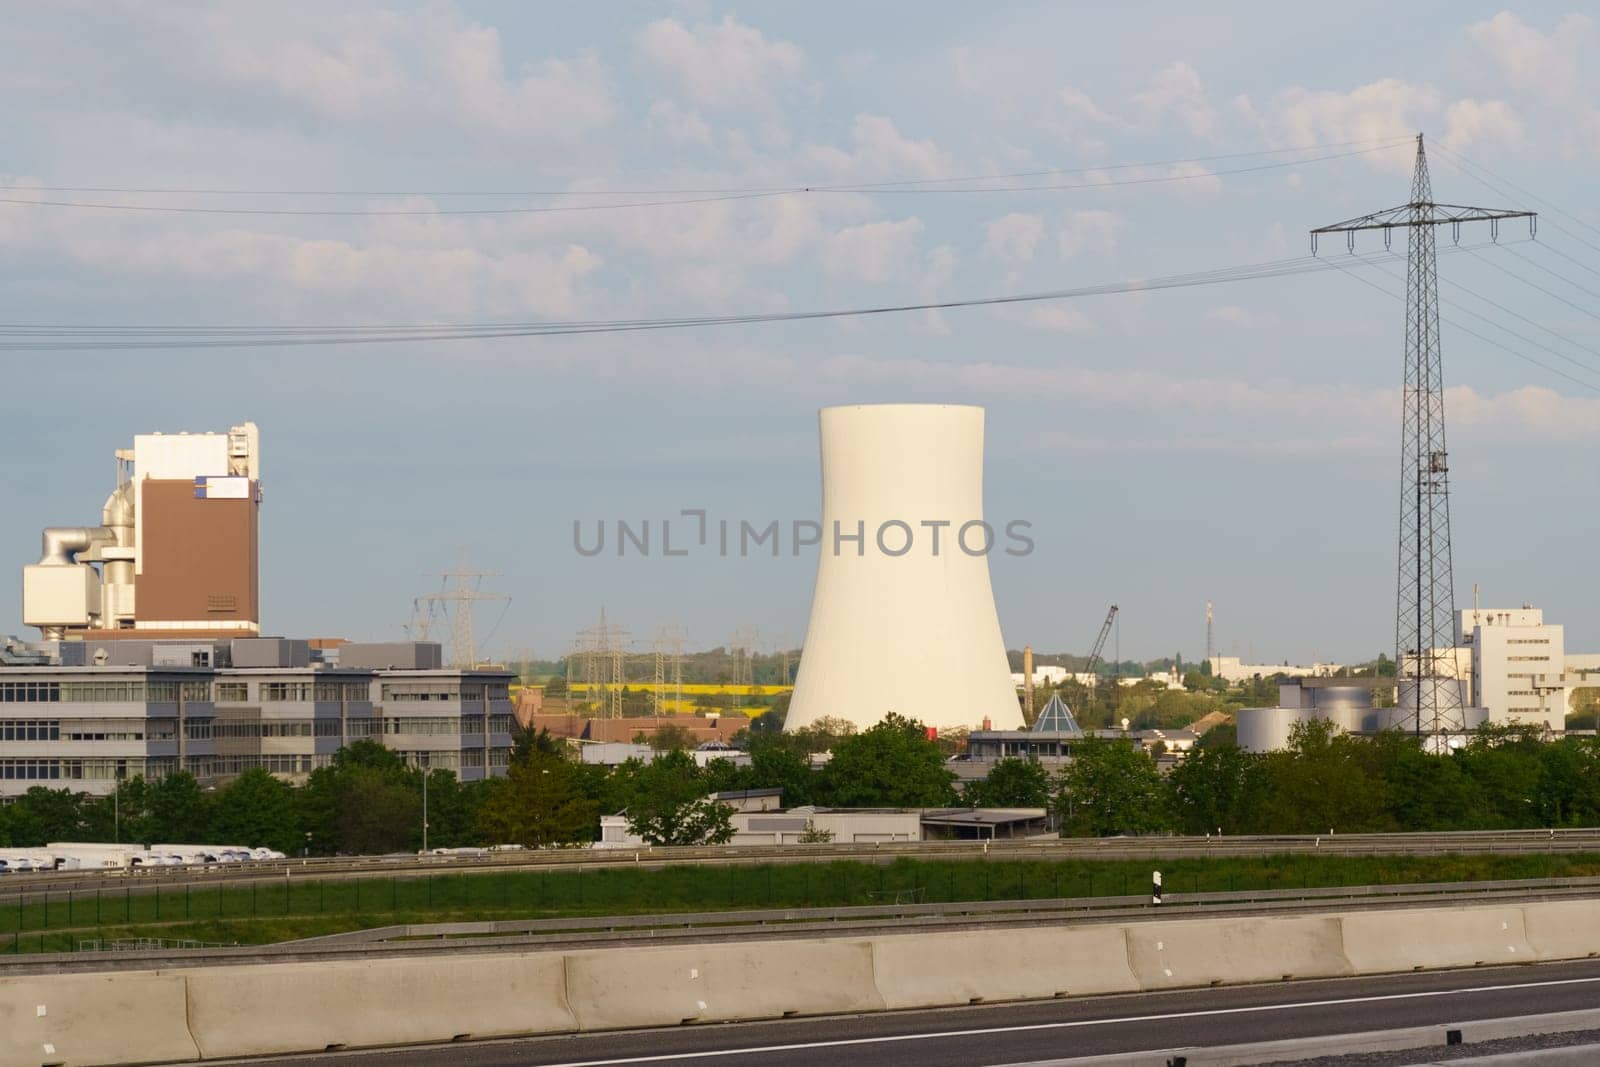 A nuclear power plant stands tall in the background while trees add a touch of nature in the foreground.